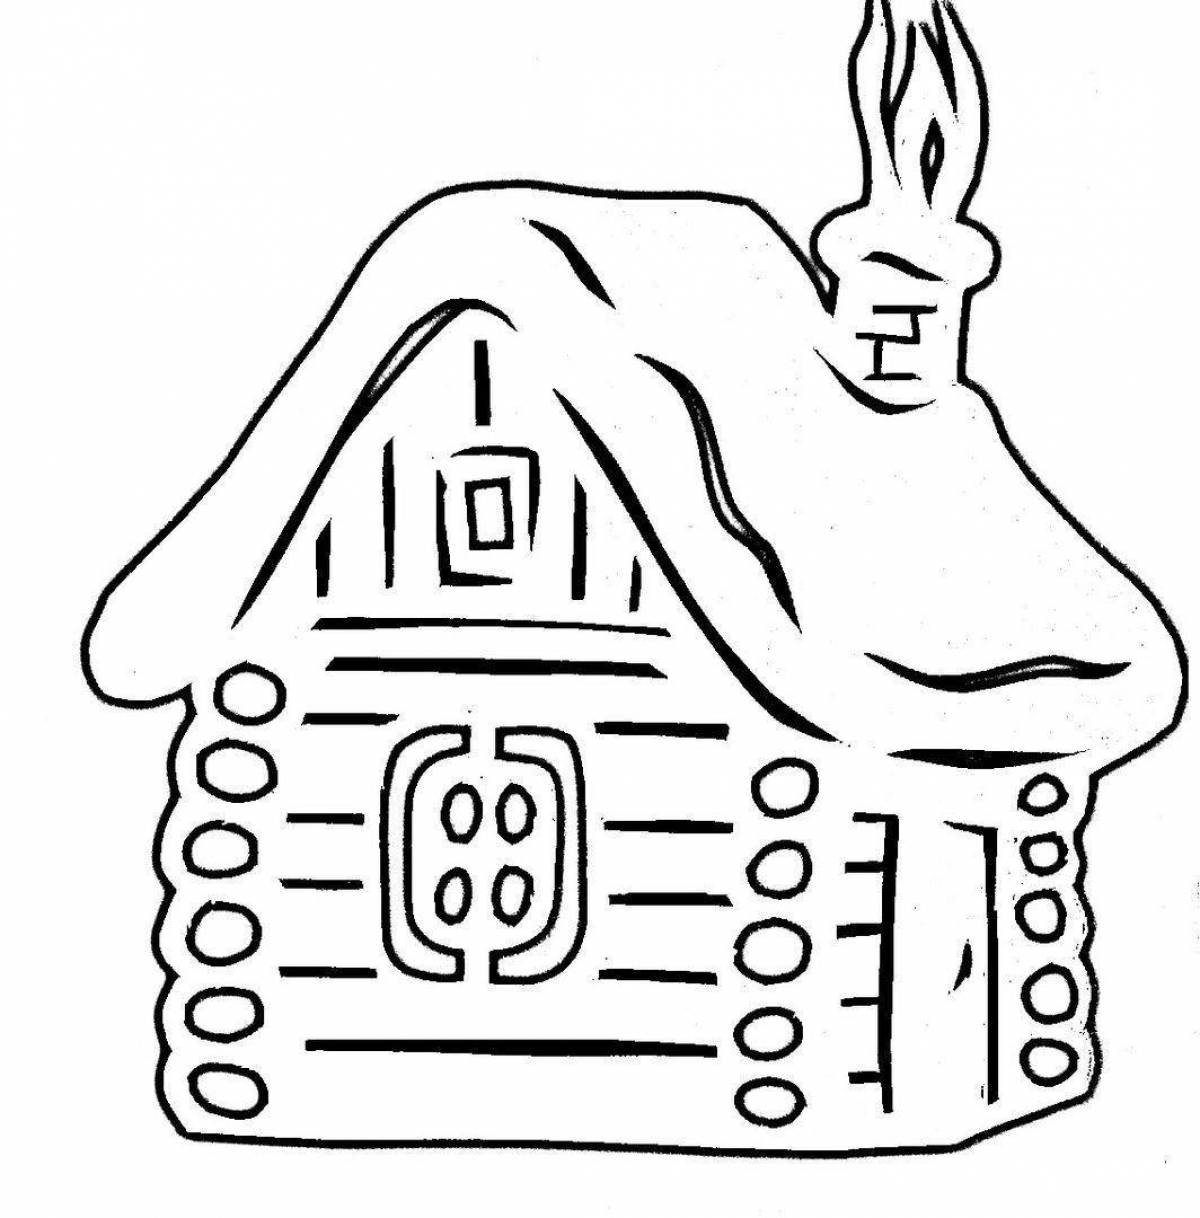 Coloring page charming bast hut